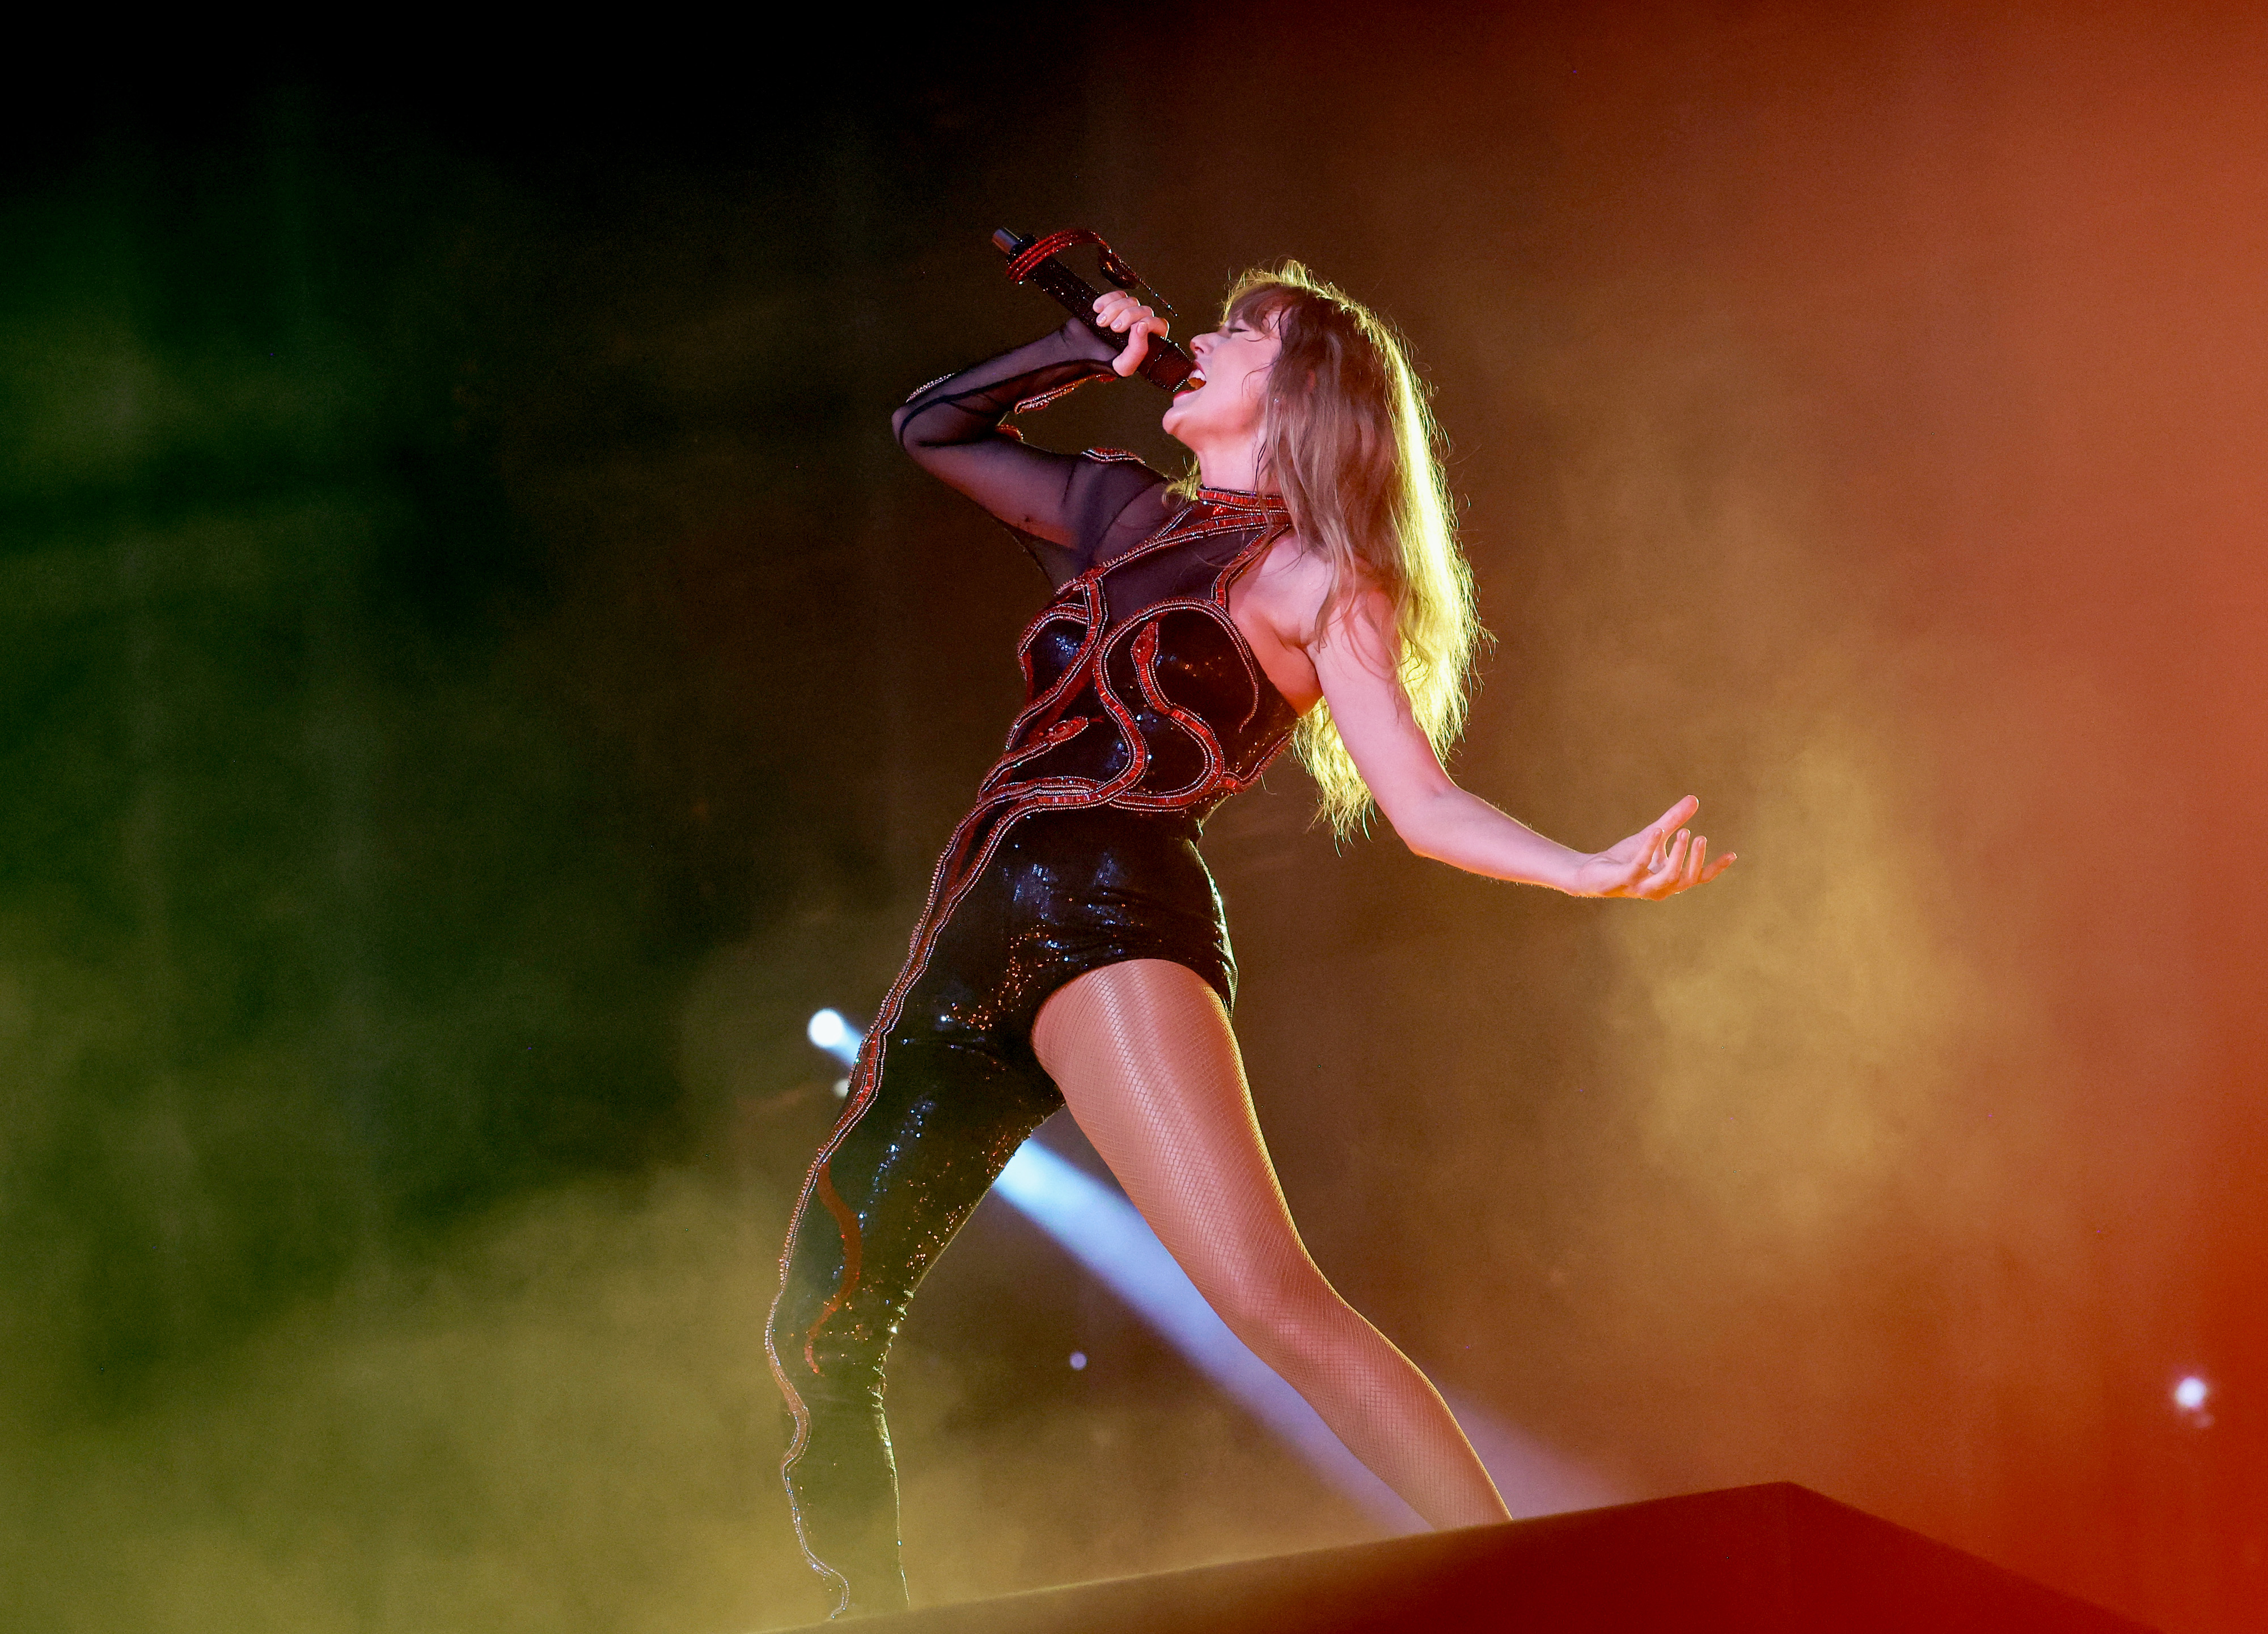 Taylor Swift singing passionately on stage, wearing a sparkling one-sleeve bodysuit with intricate designs